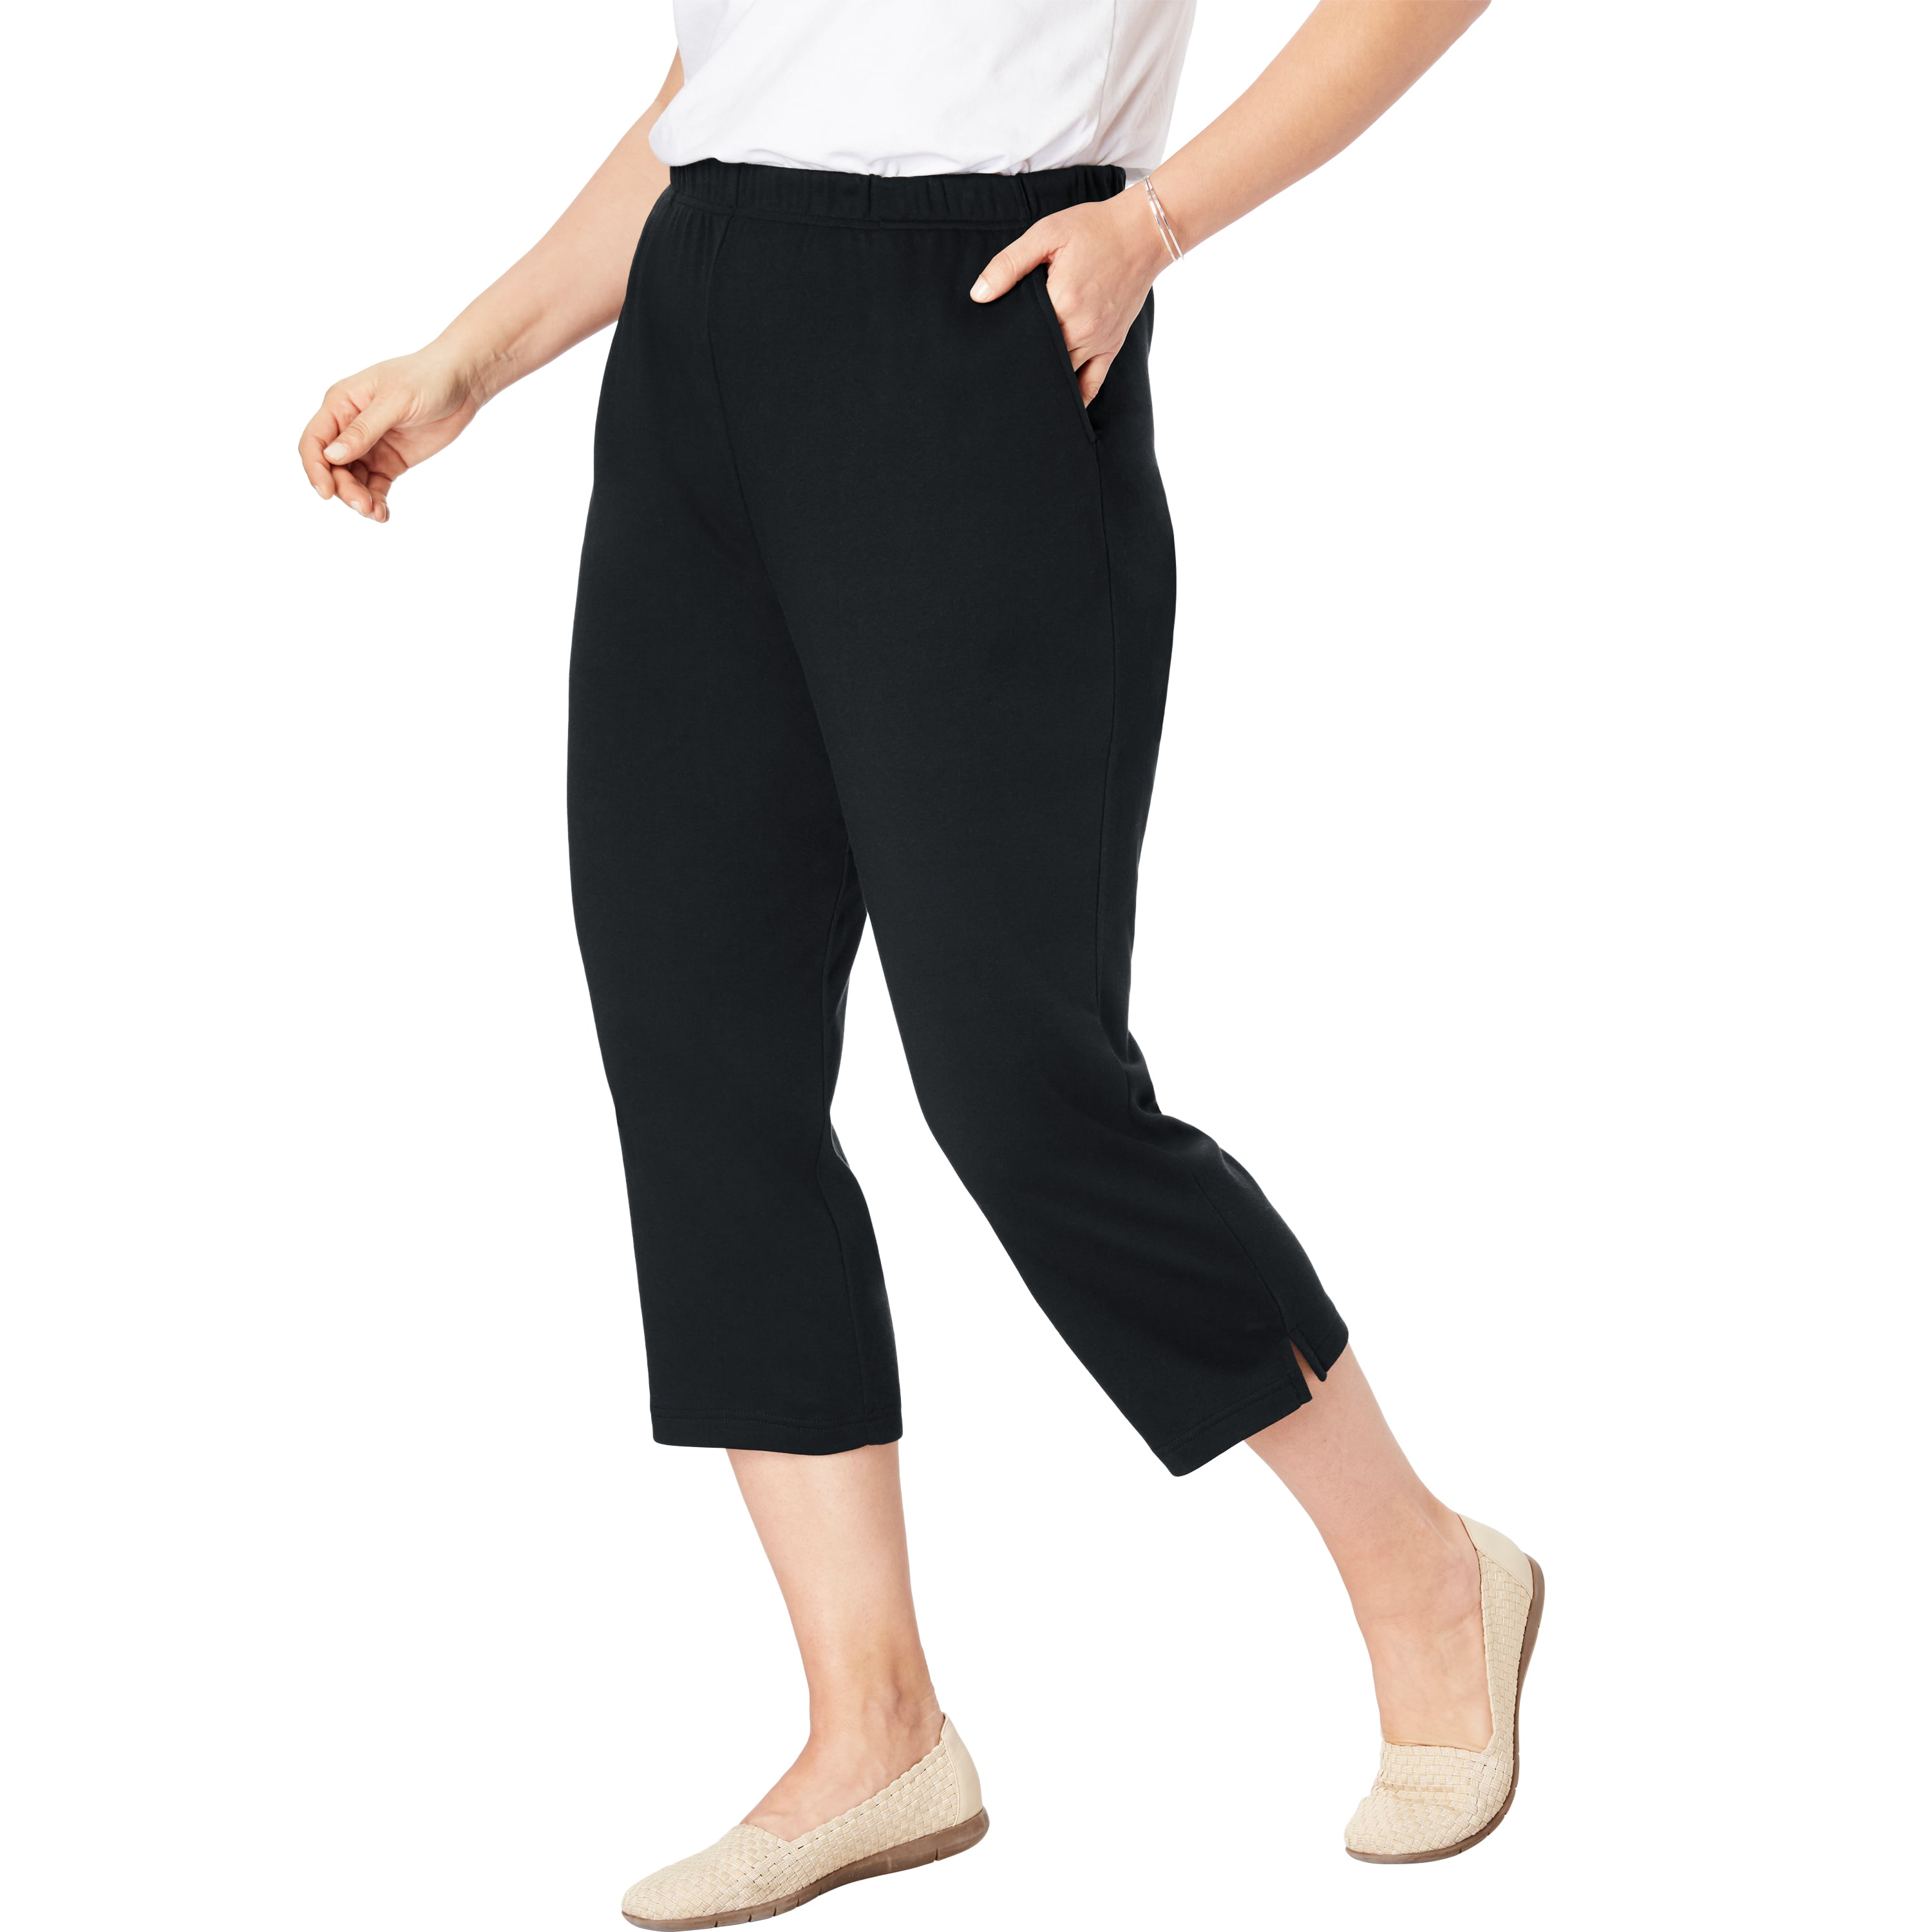 Woman Within Plus Med 14-16  Wide Leg Capris in stretch knit  Royal MSRP $25.